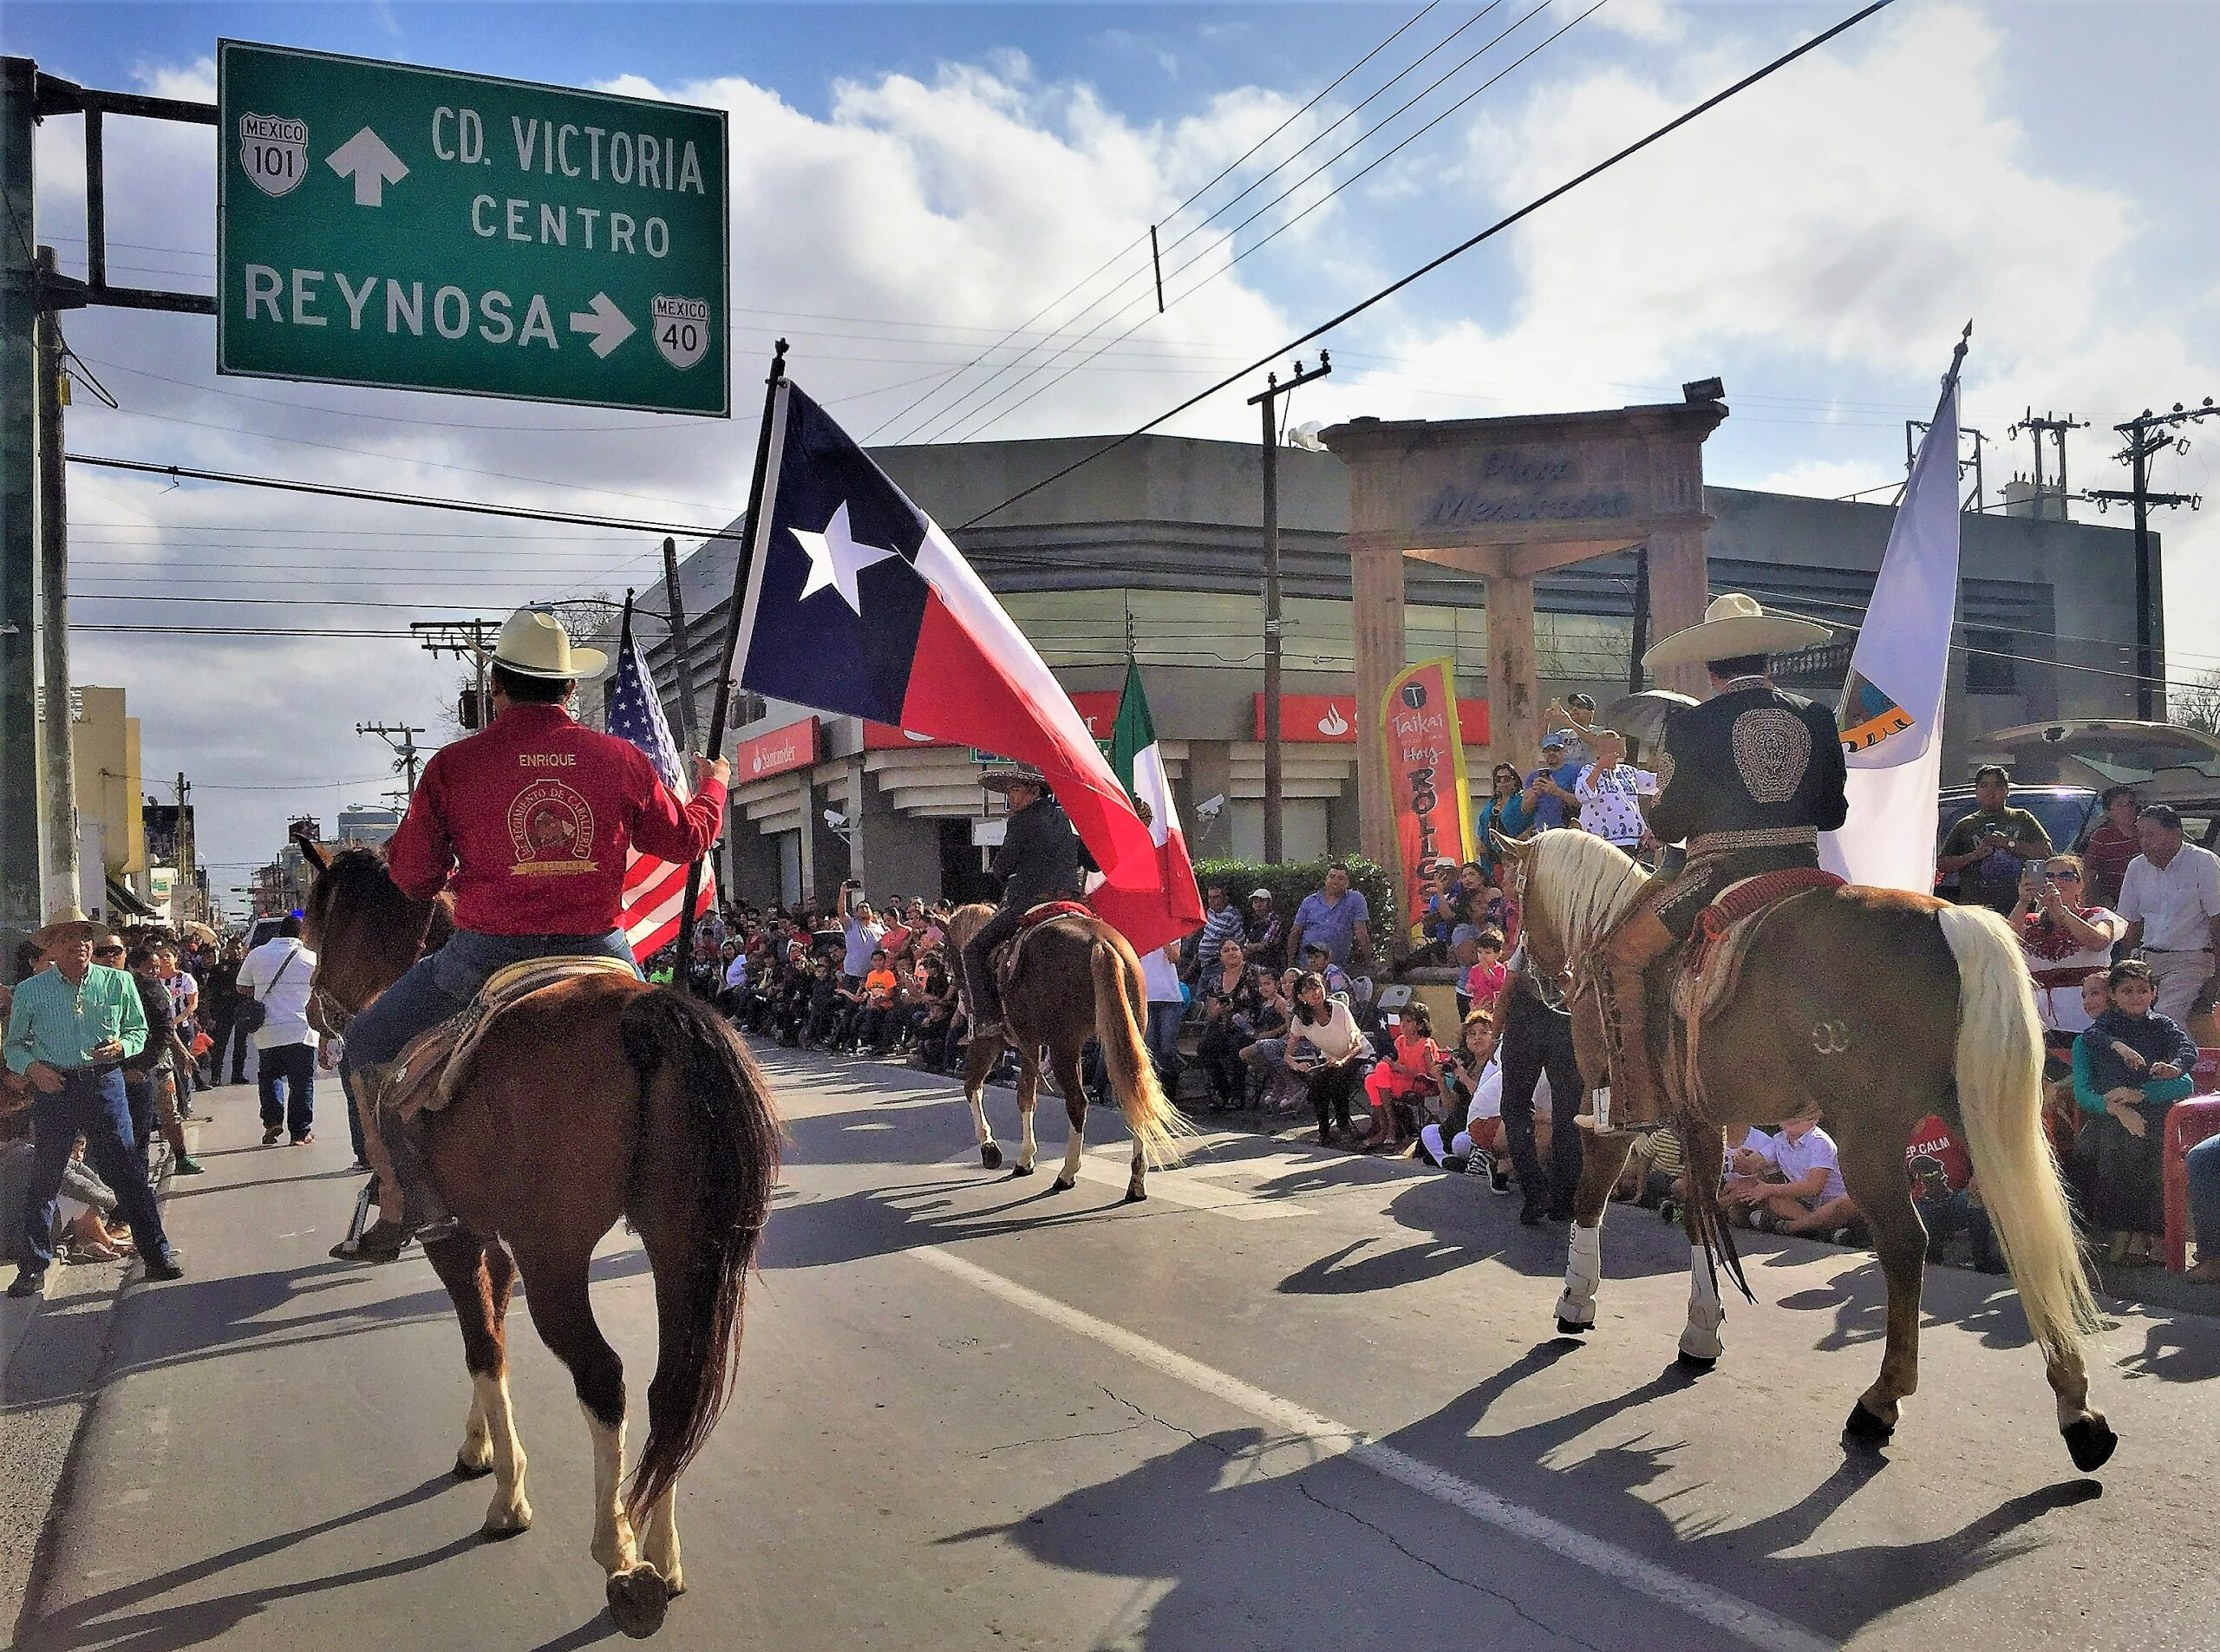 A parade along the border (frontera) with participants in cowbow hats on horseback. The main rider in focus is holding a Texas flag. Viewers cheer from along the edge of the street in a dense crowd.